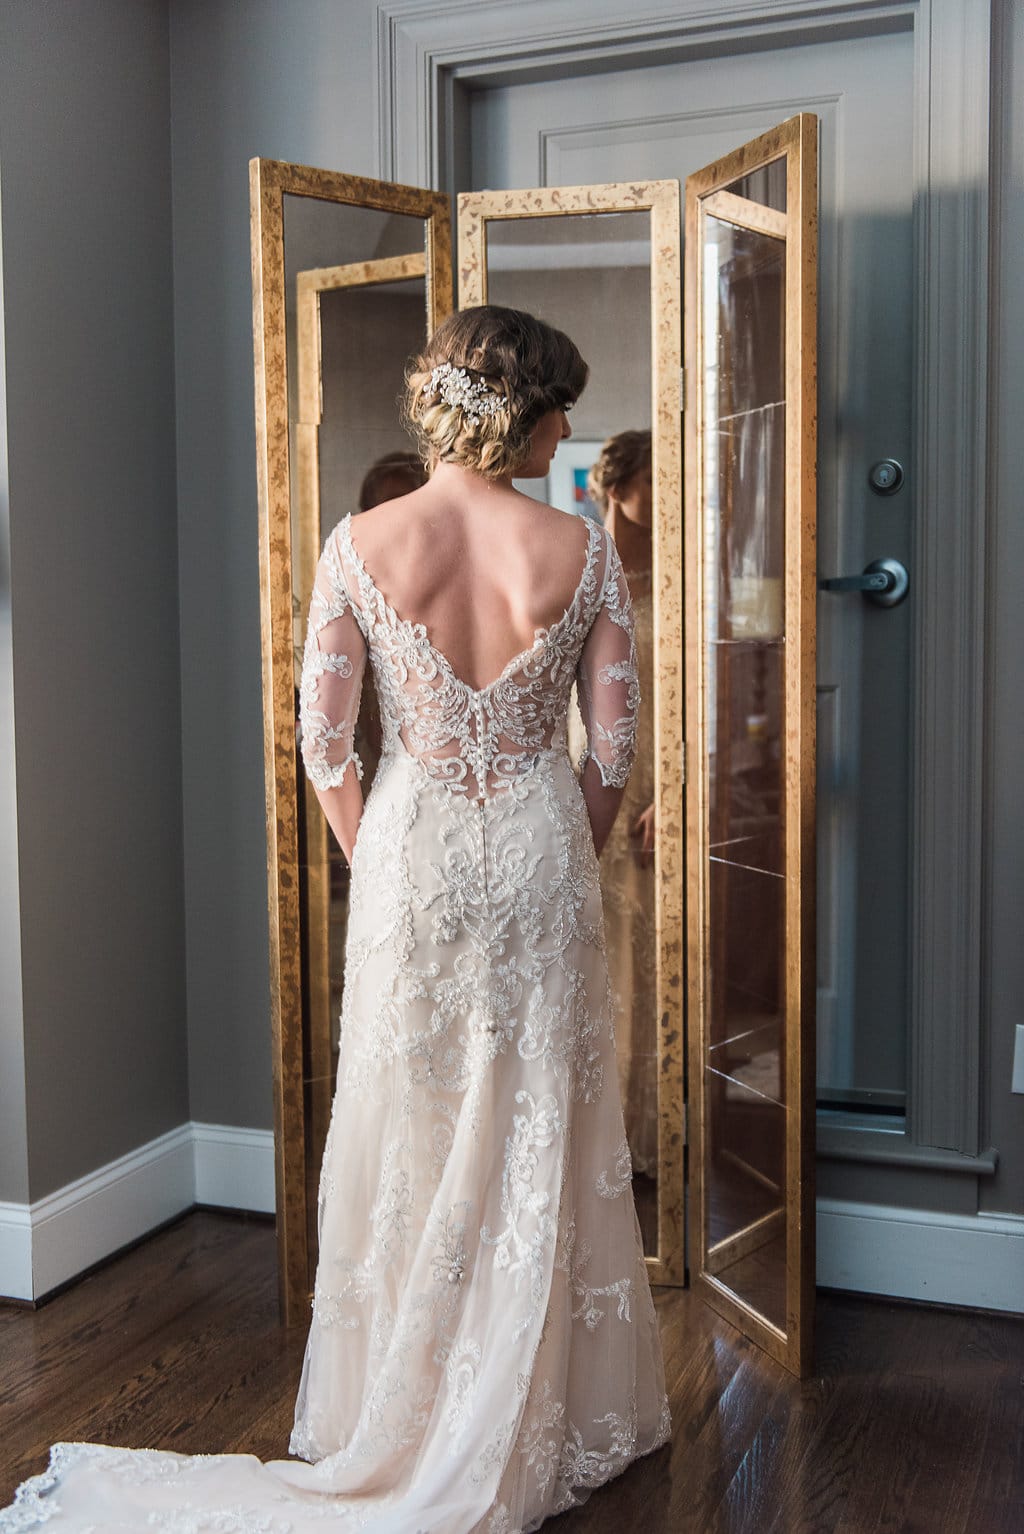 Winter-Wonderland Wedding Infused with Southern Charm: Maggie Bride wearing Verina by Maggie Sottero.